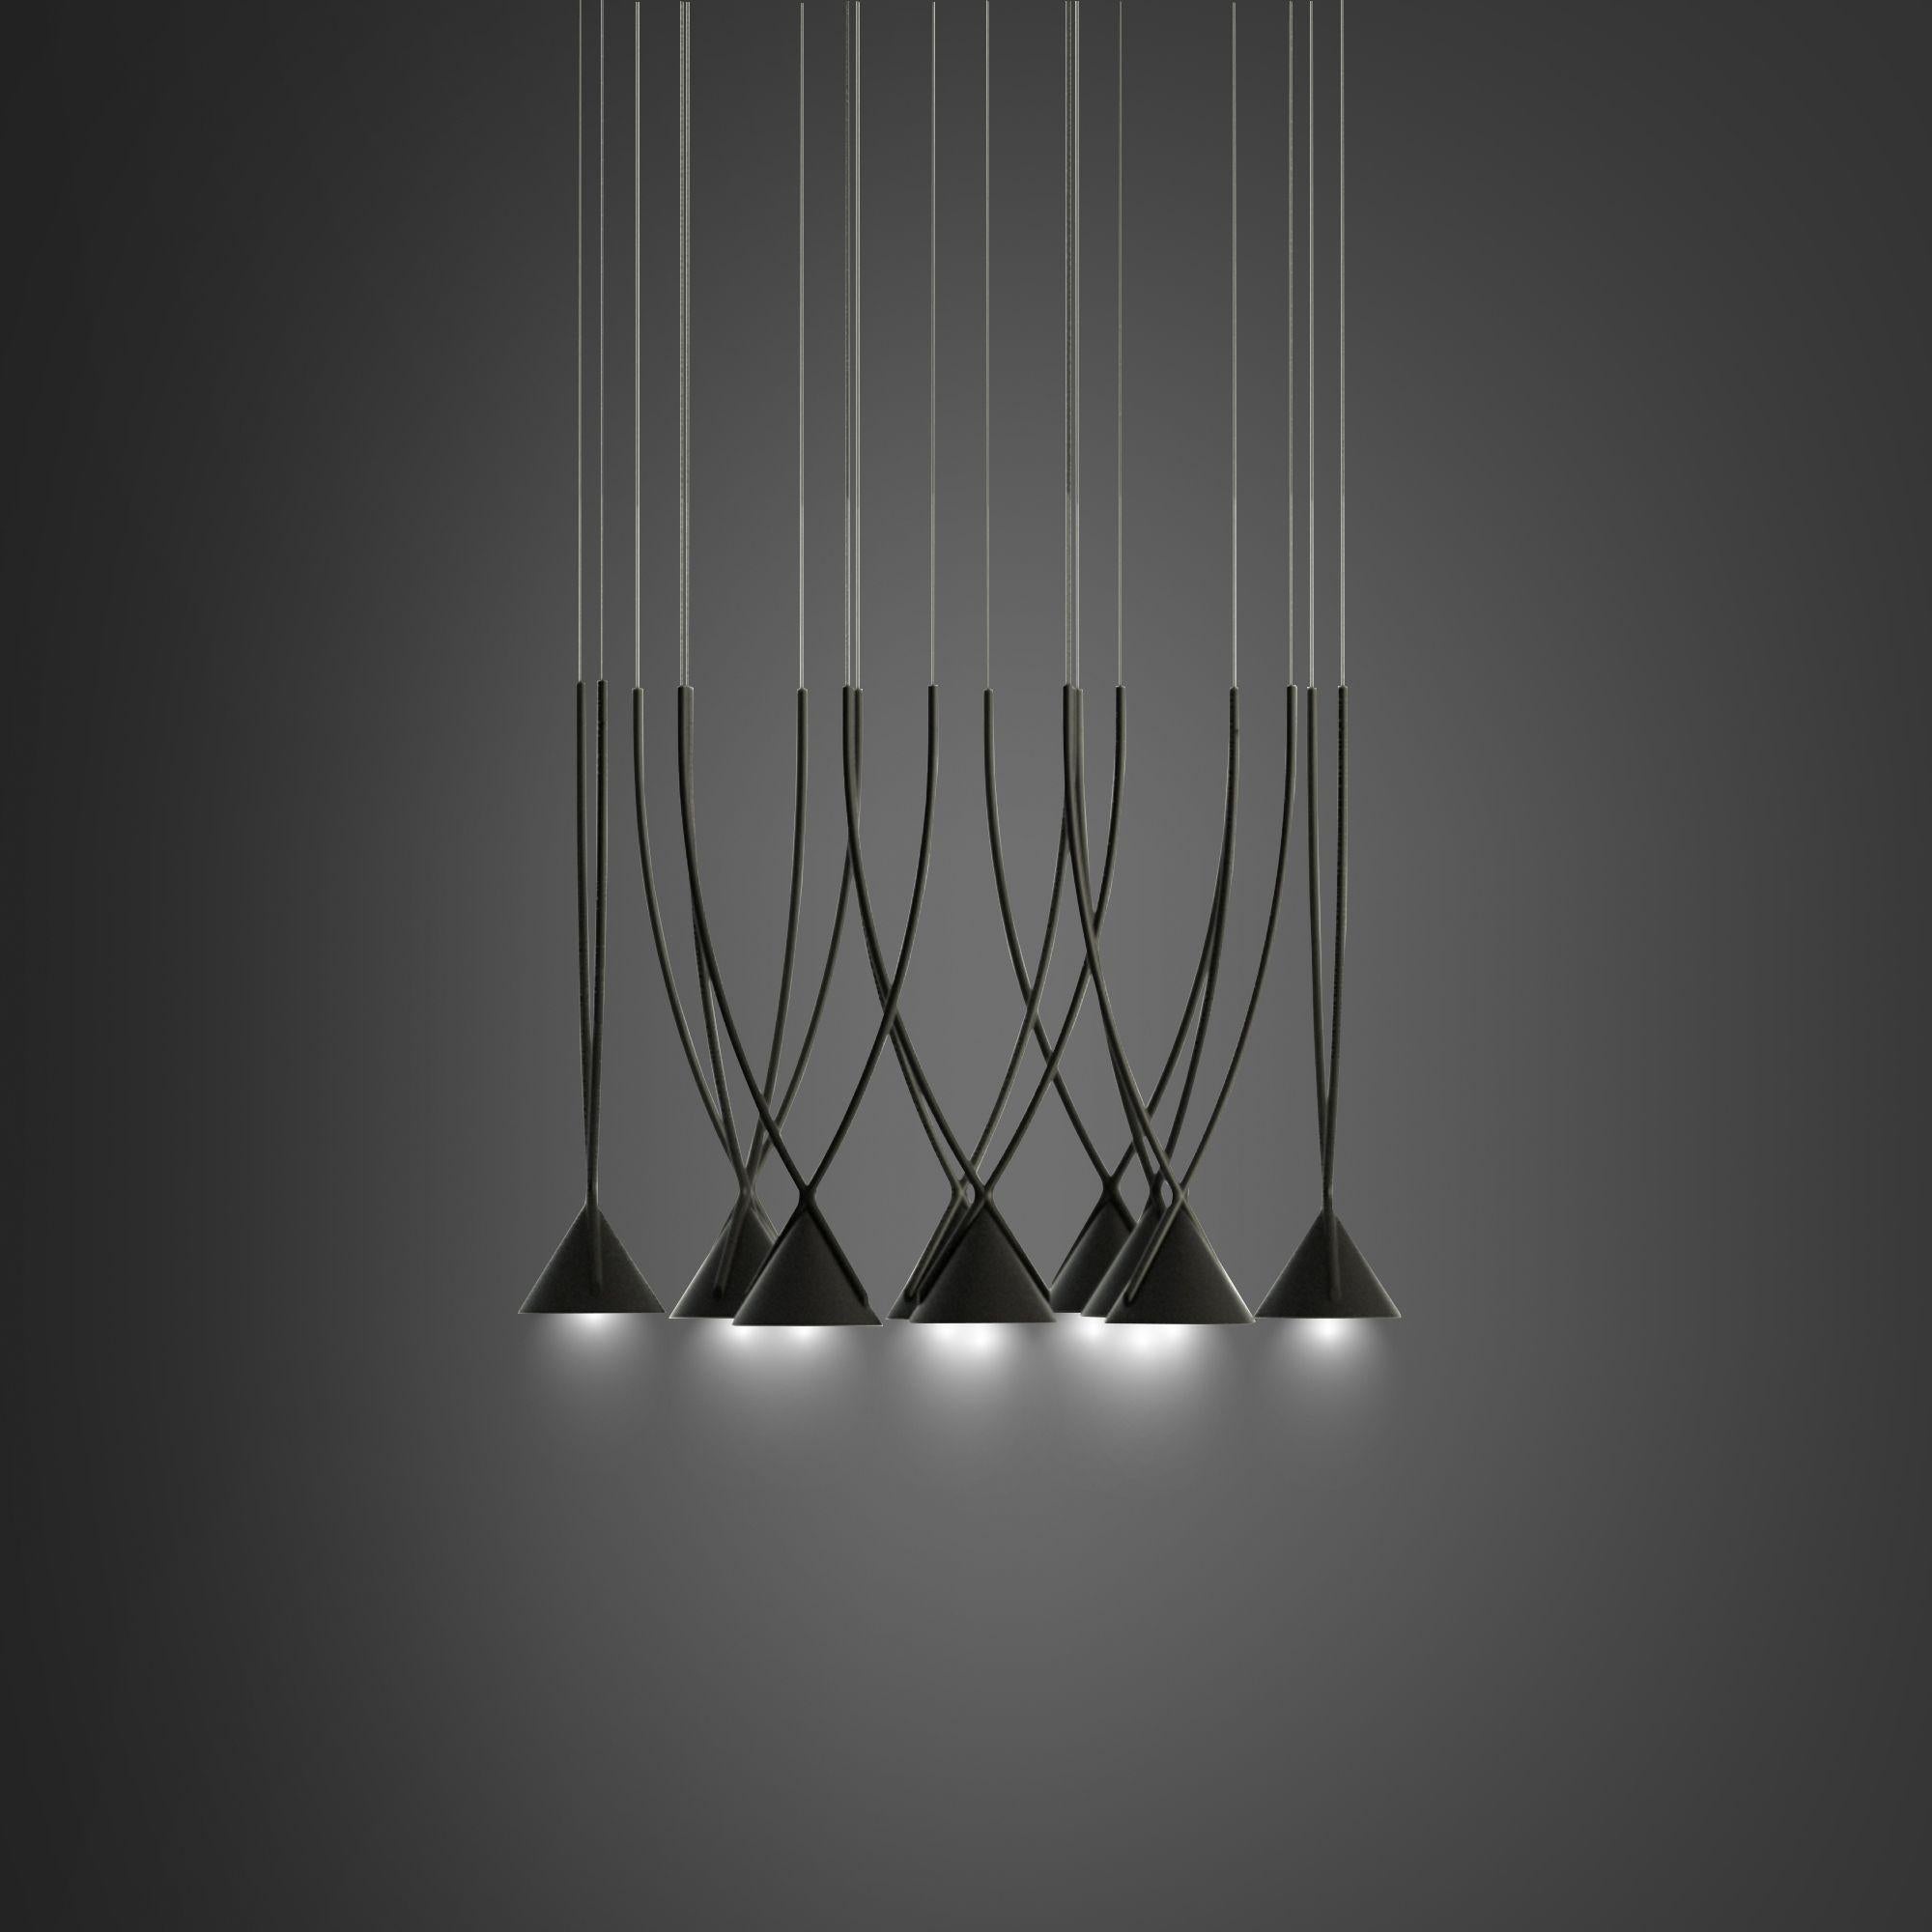 Axolight Jewel Medium 10 Pendant Lamp in Black with Black Finish by Yonoh

Synthesizing is the gift of knowing how to transmit complex things in a simple way. Jewel mono summarizes: minimalism in design and high lighting performance, aesthetic